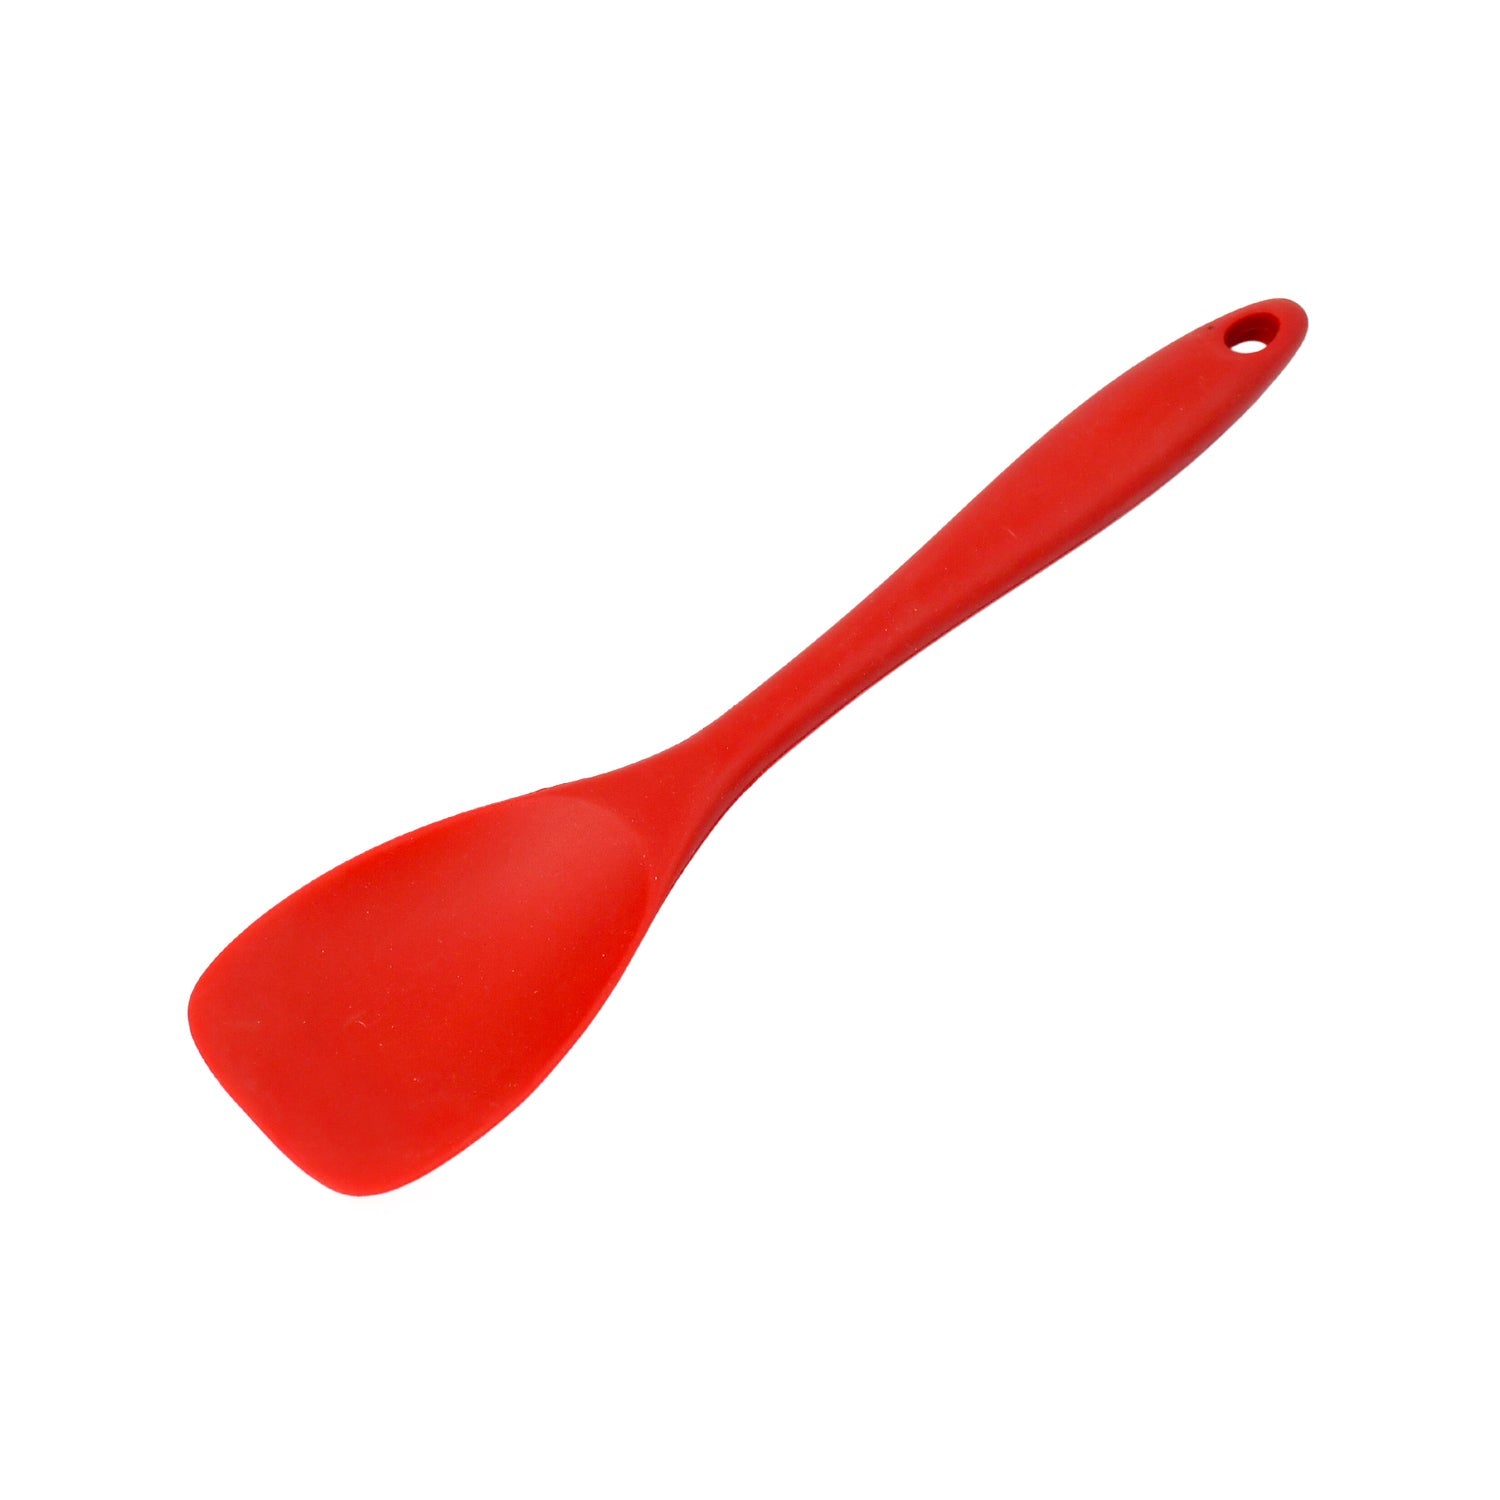 5374 HEAT RESISTANT SILICONE SPATULA NON-STICK WOK TURNER IN HYGIENIC SOLID COATING COOKWARE KITCHEN TOOLS DeoDap